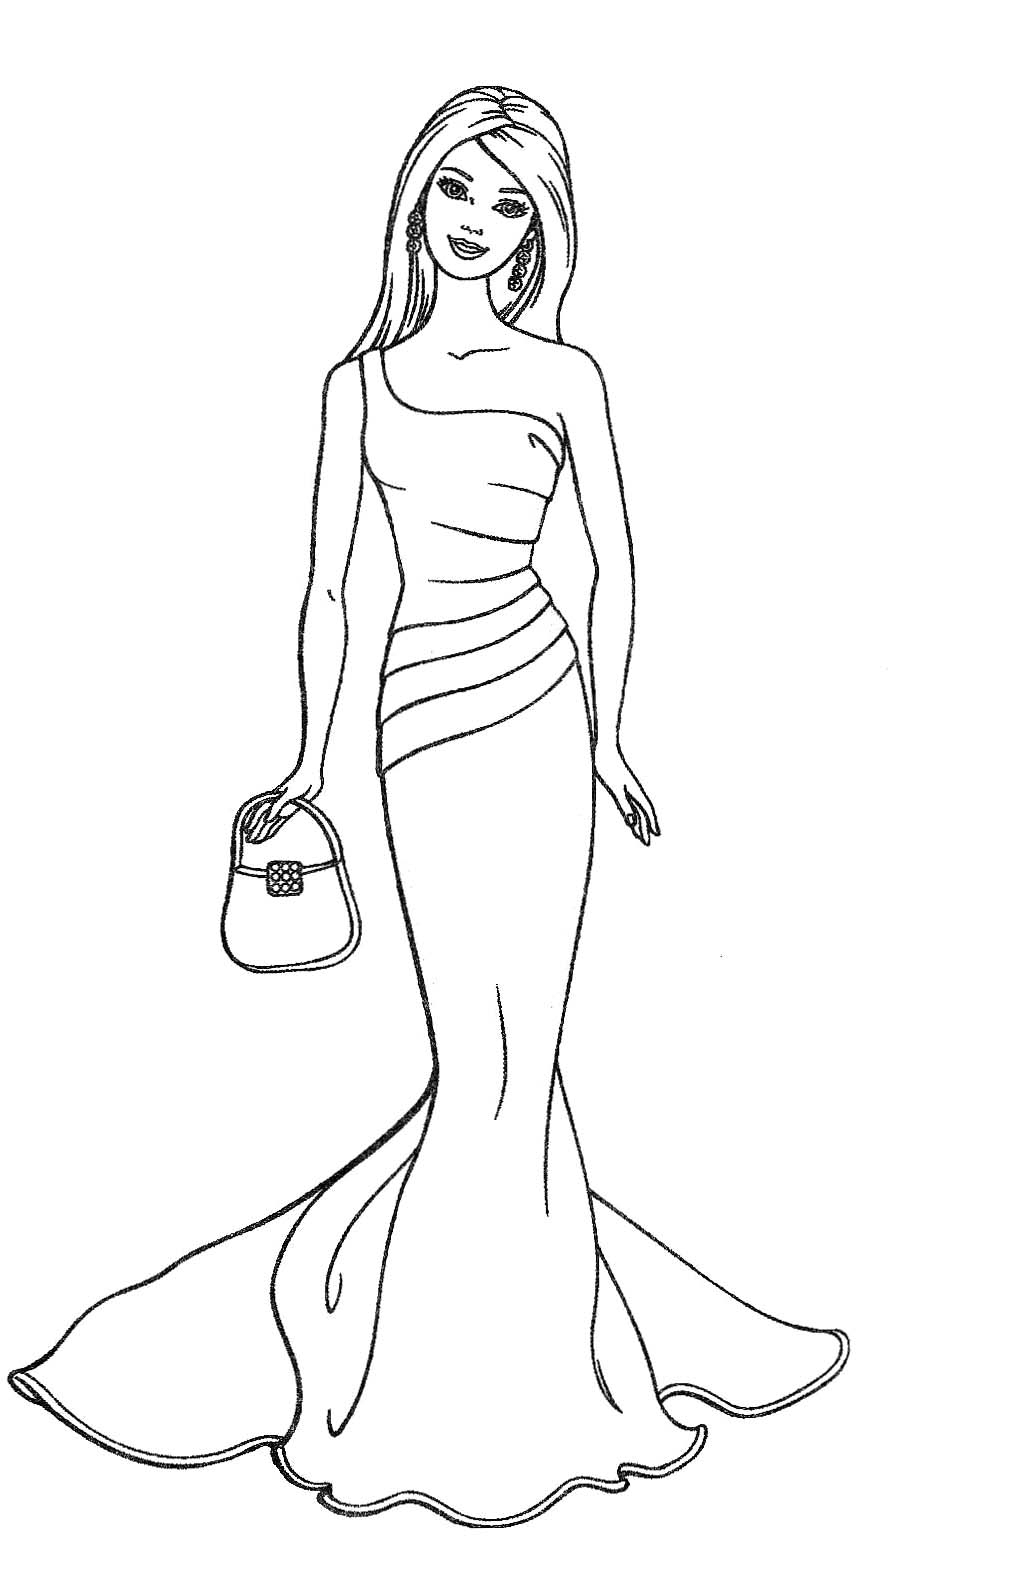 Free download on ayoqq. Barbie clipart drawing